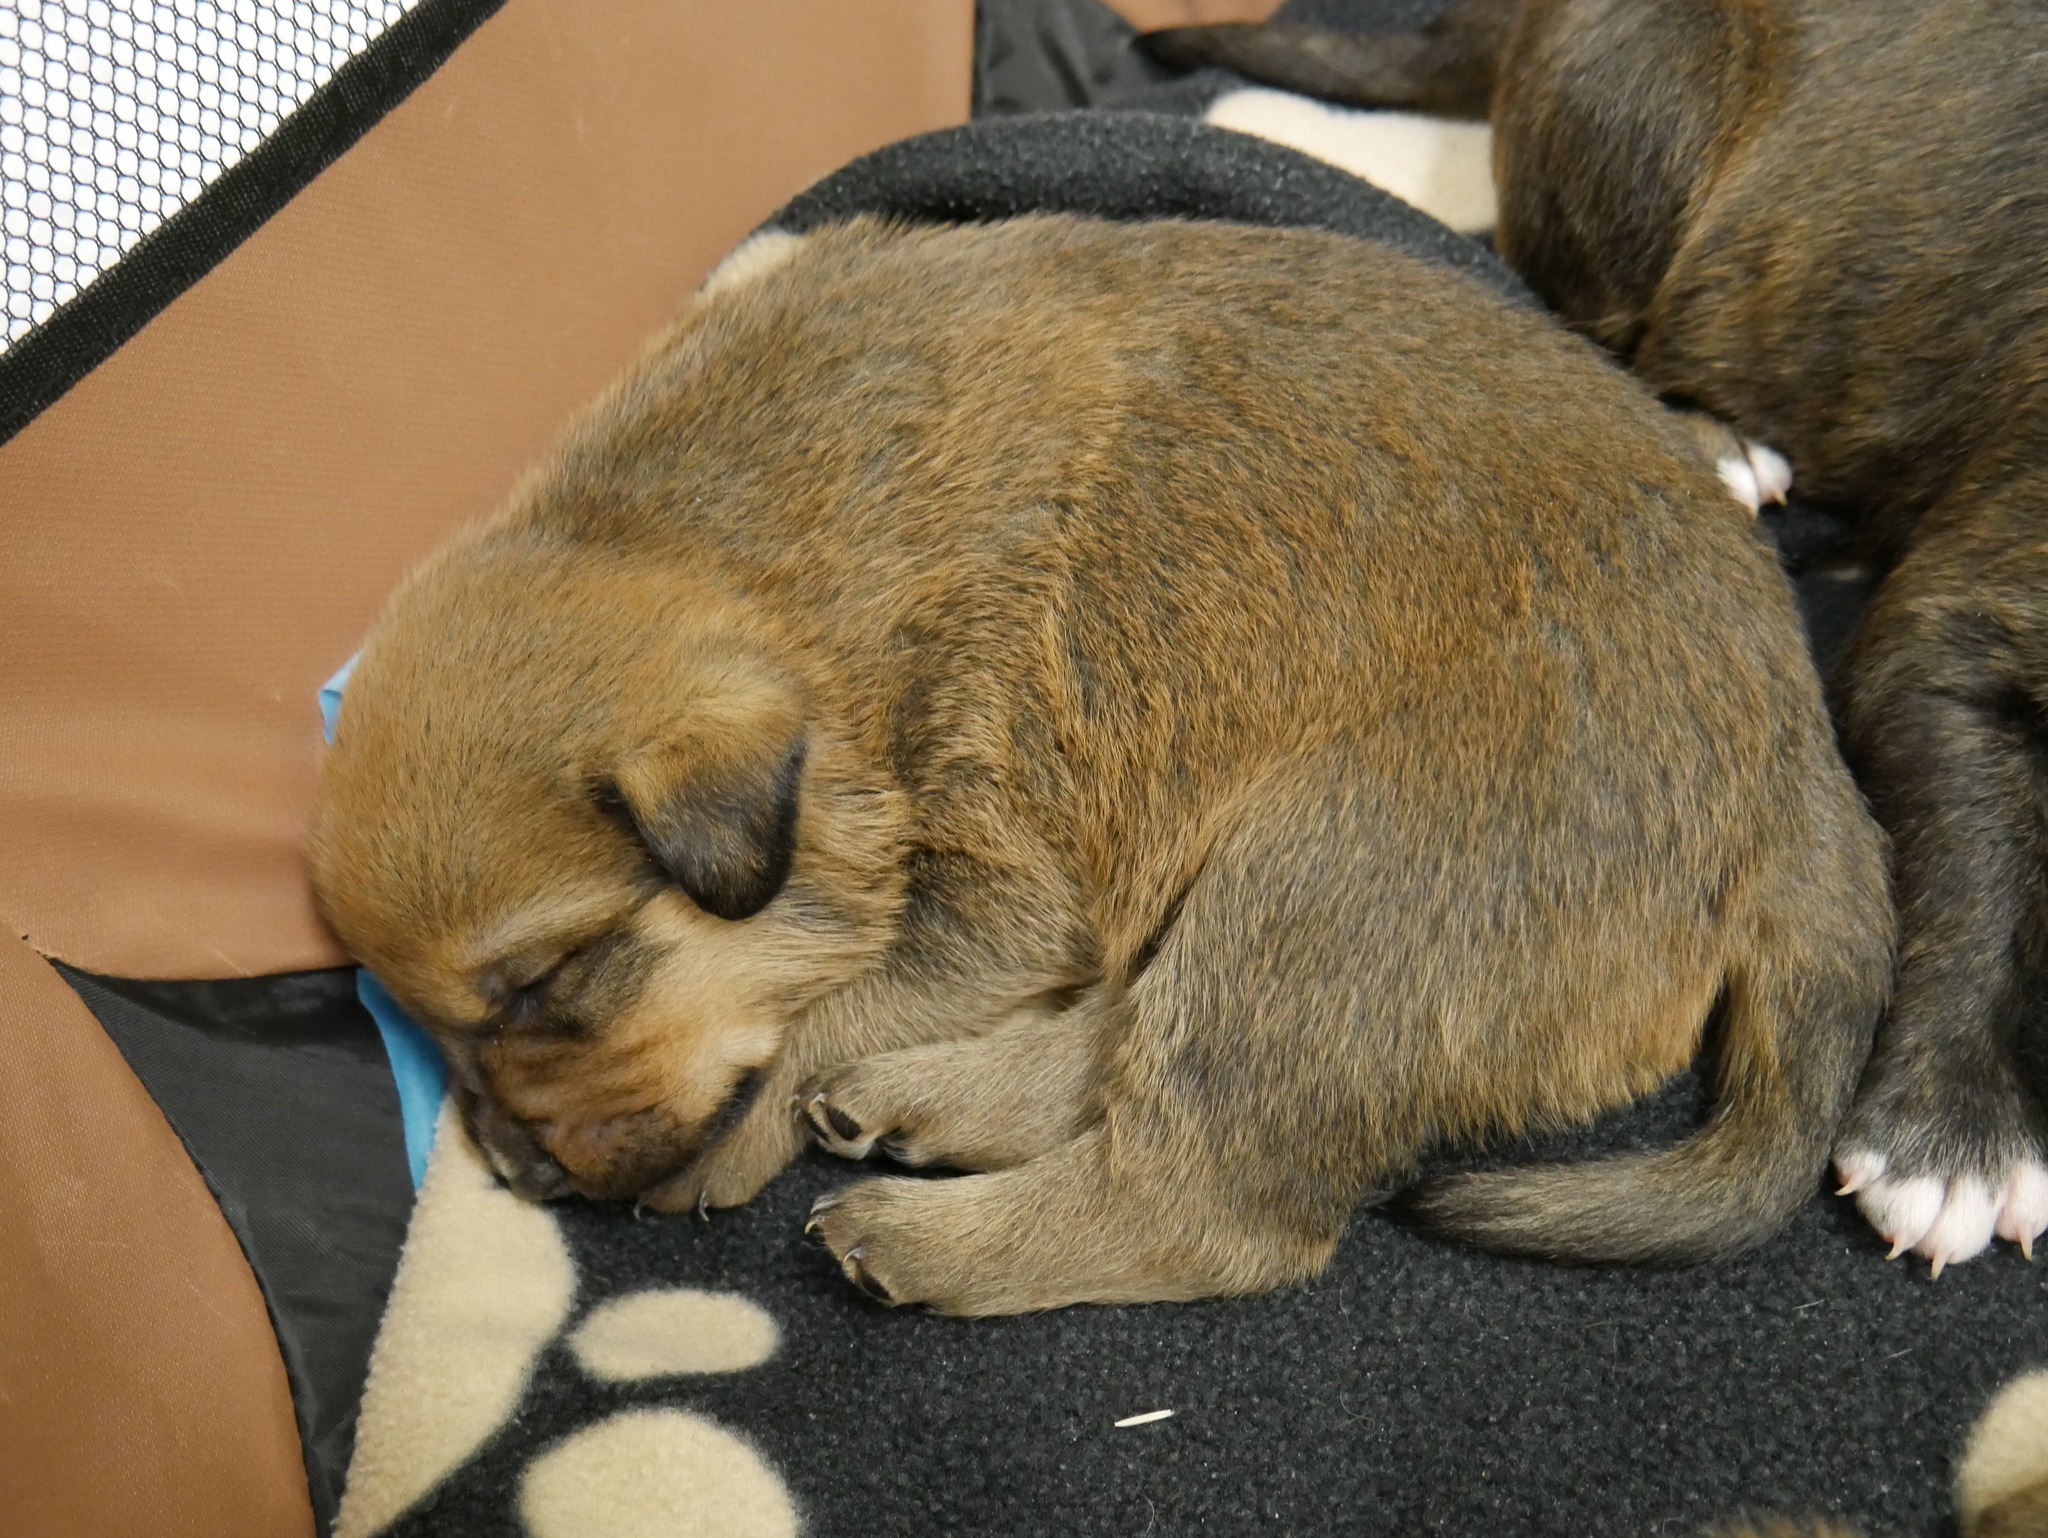 Puppies abandoned at construction site